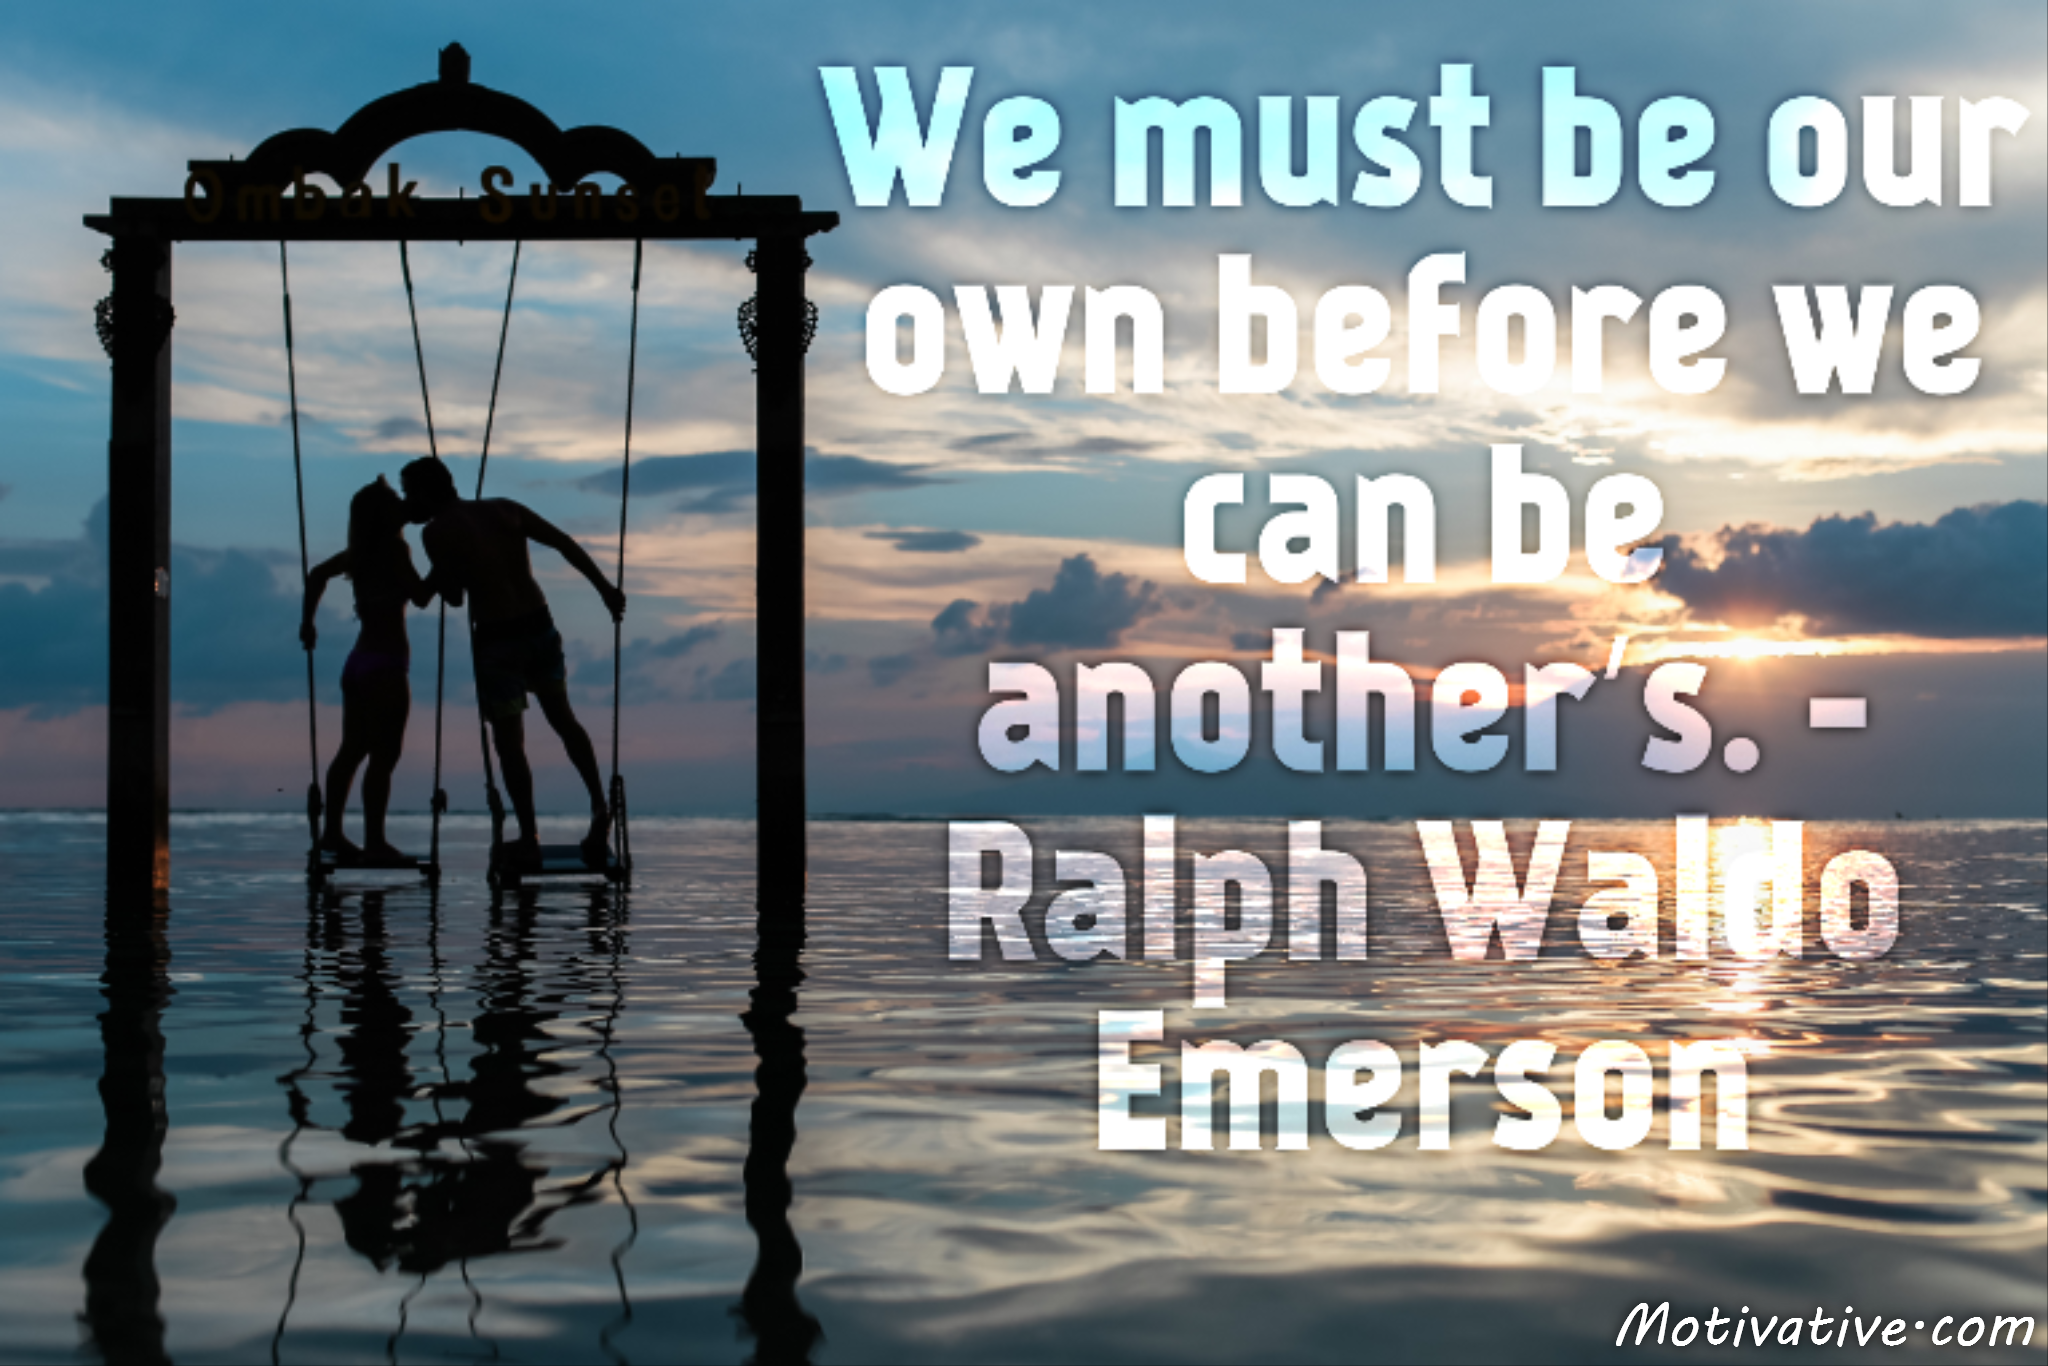 We must be our own before we can be another’s. – Ralph Waldo Emerson